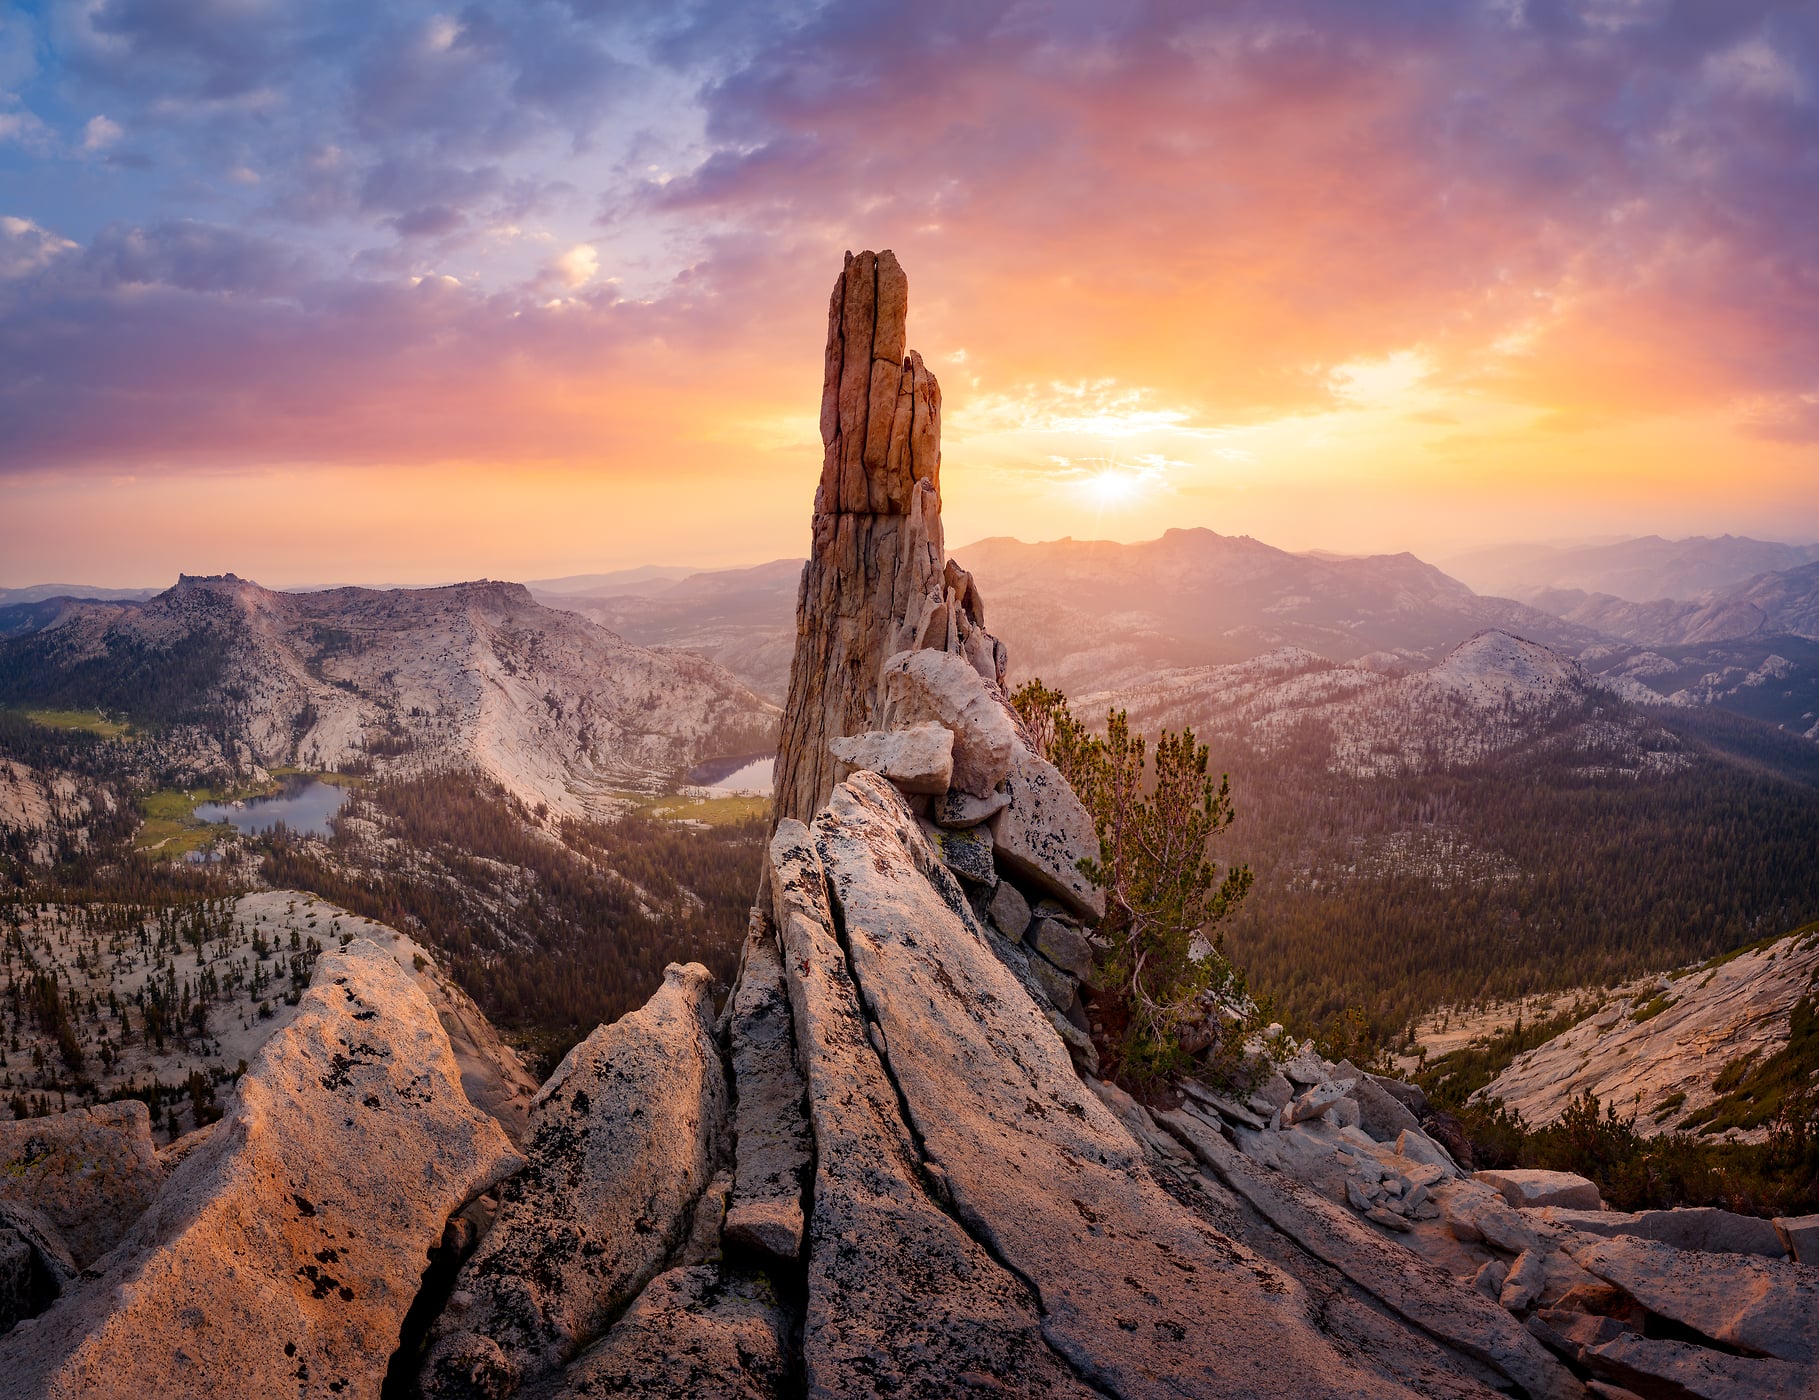 183 megapixels! A very high resolution, large-format VAST photo print of an inspirational scene with rock formation, sunset, mountains, lakes, and a valley; landscape photograph created by Jeff Lewis in Yosemite National Park, California.